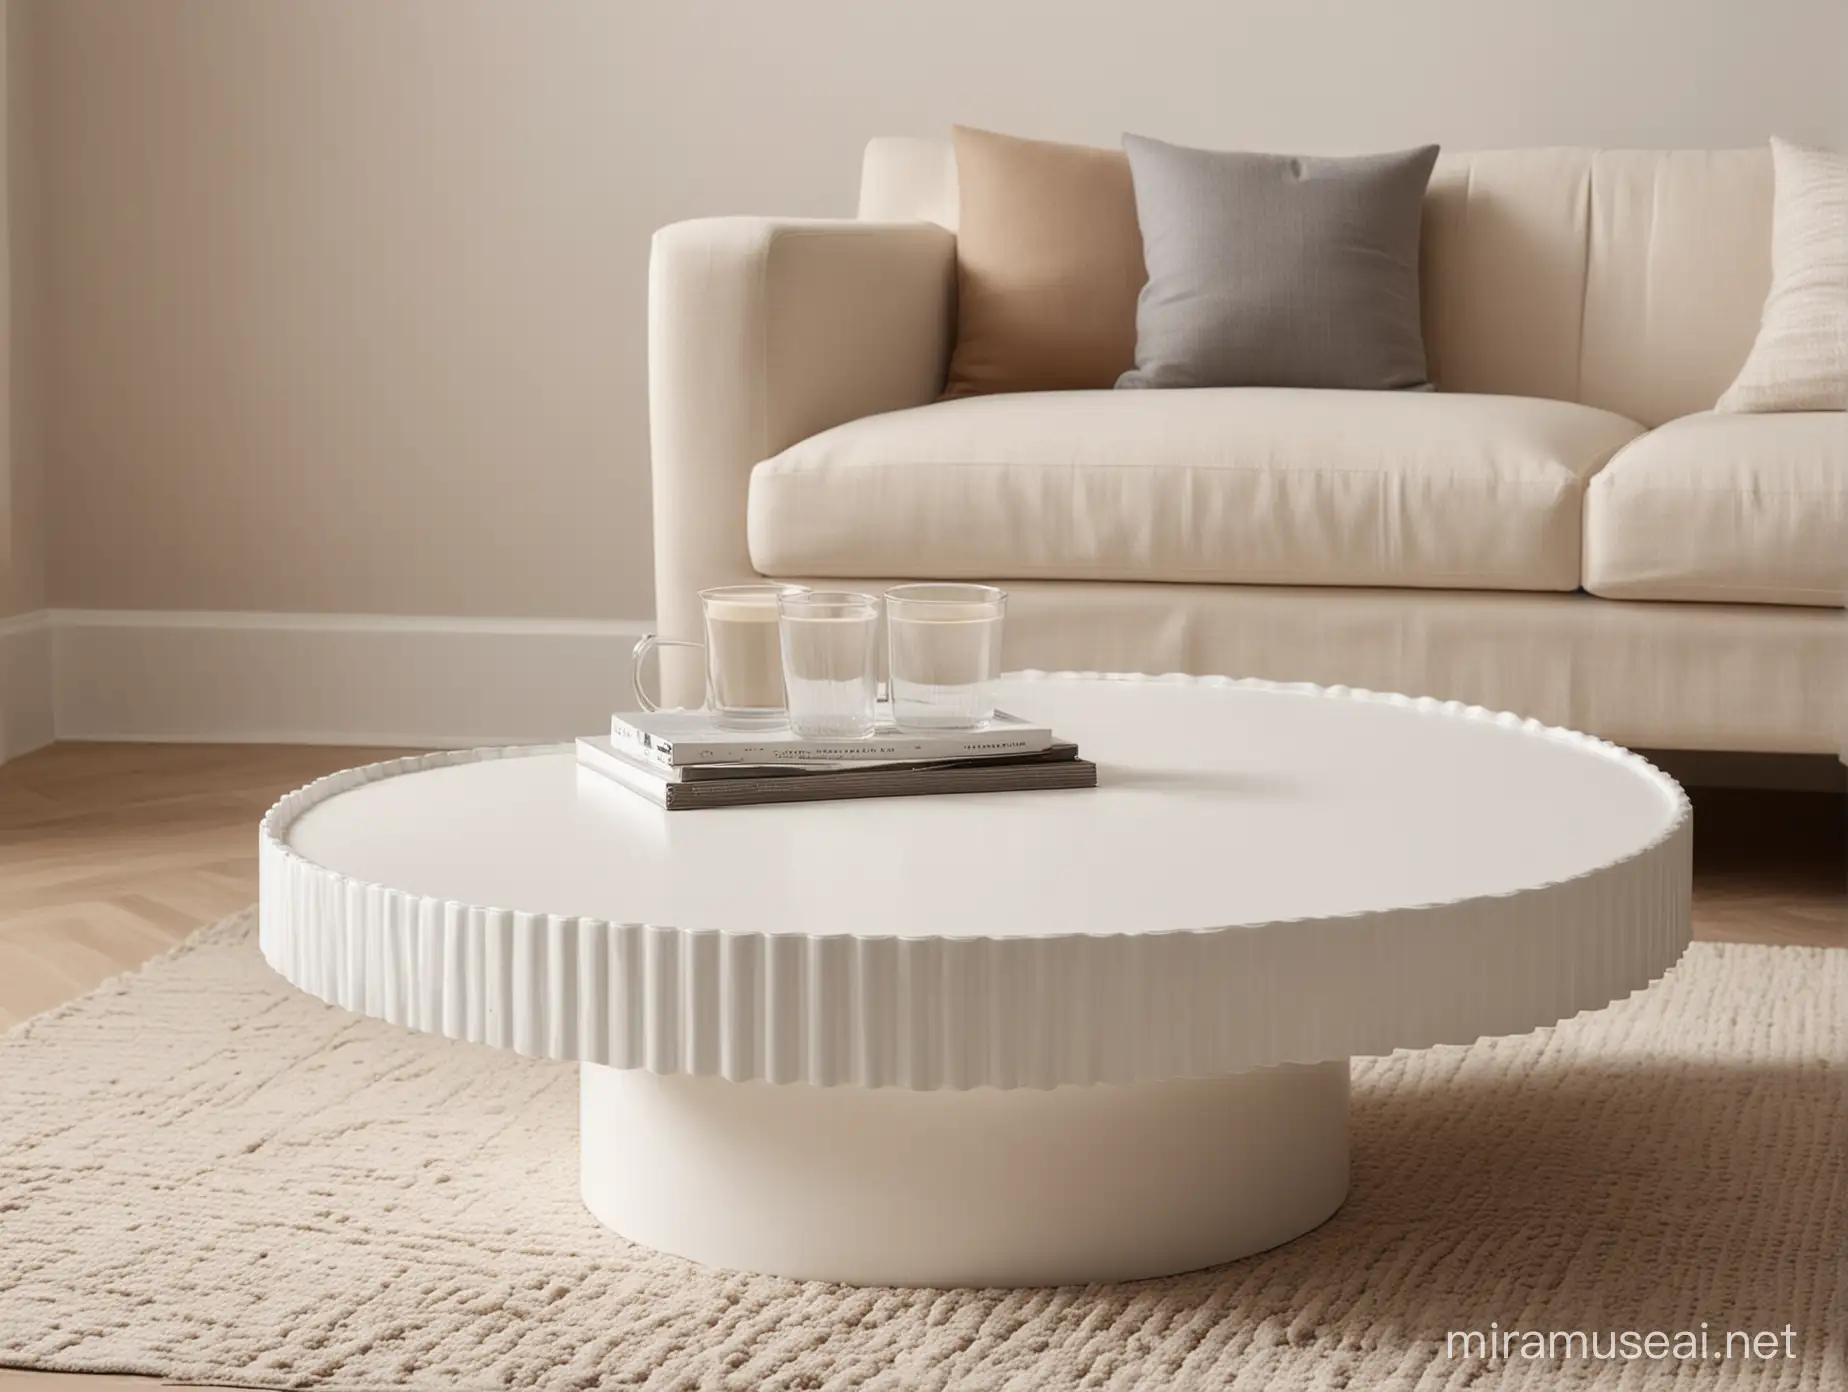 Minimalist White Circle Fluted Coffee Table in Lifestyle Setting